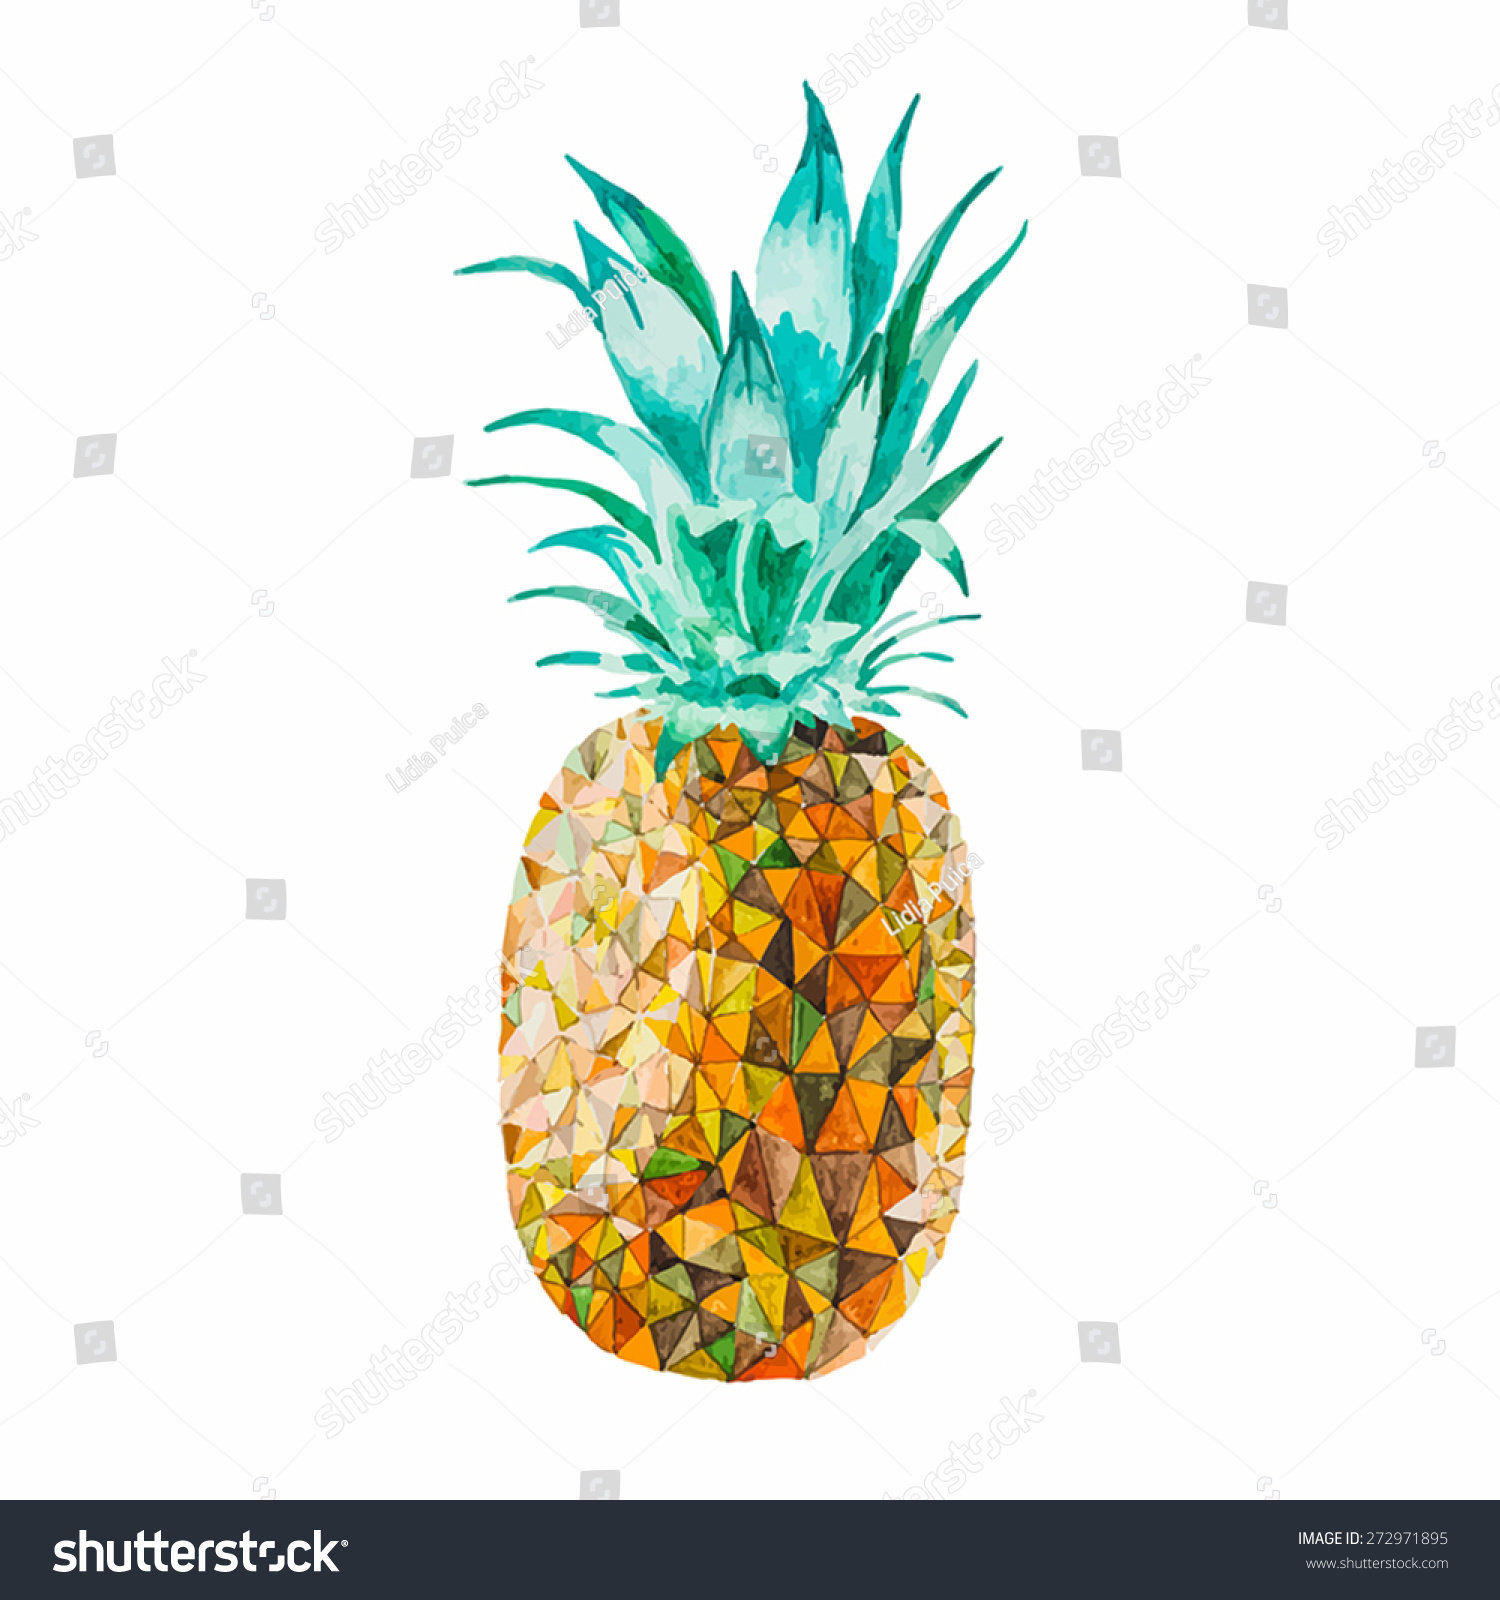 Download Pineapple Low Poly Watercolor Stock Vector (Royalty Free) 272971895 - Shutterstock